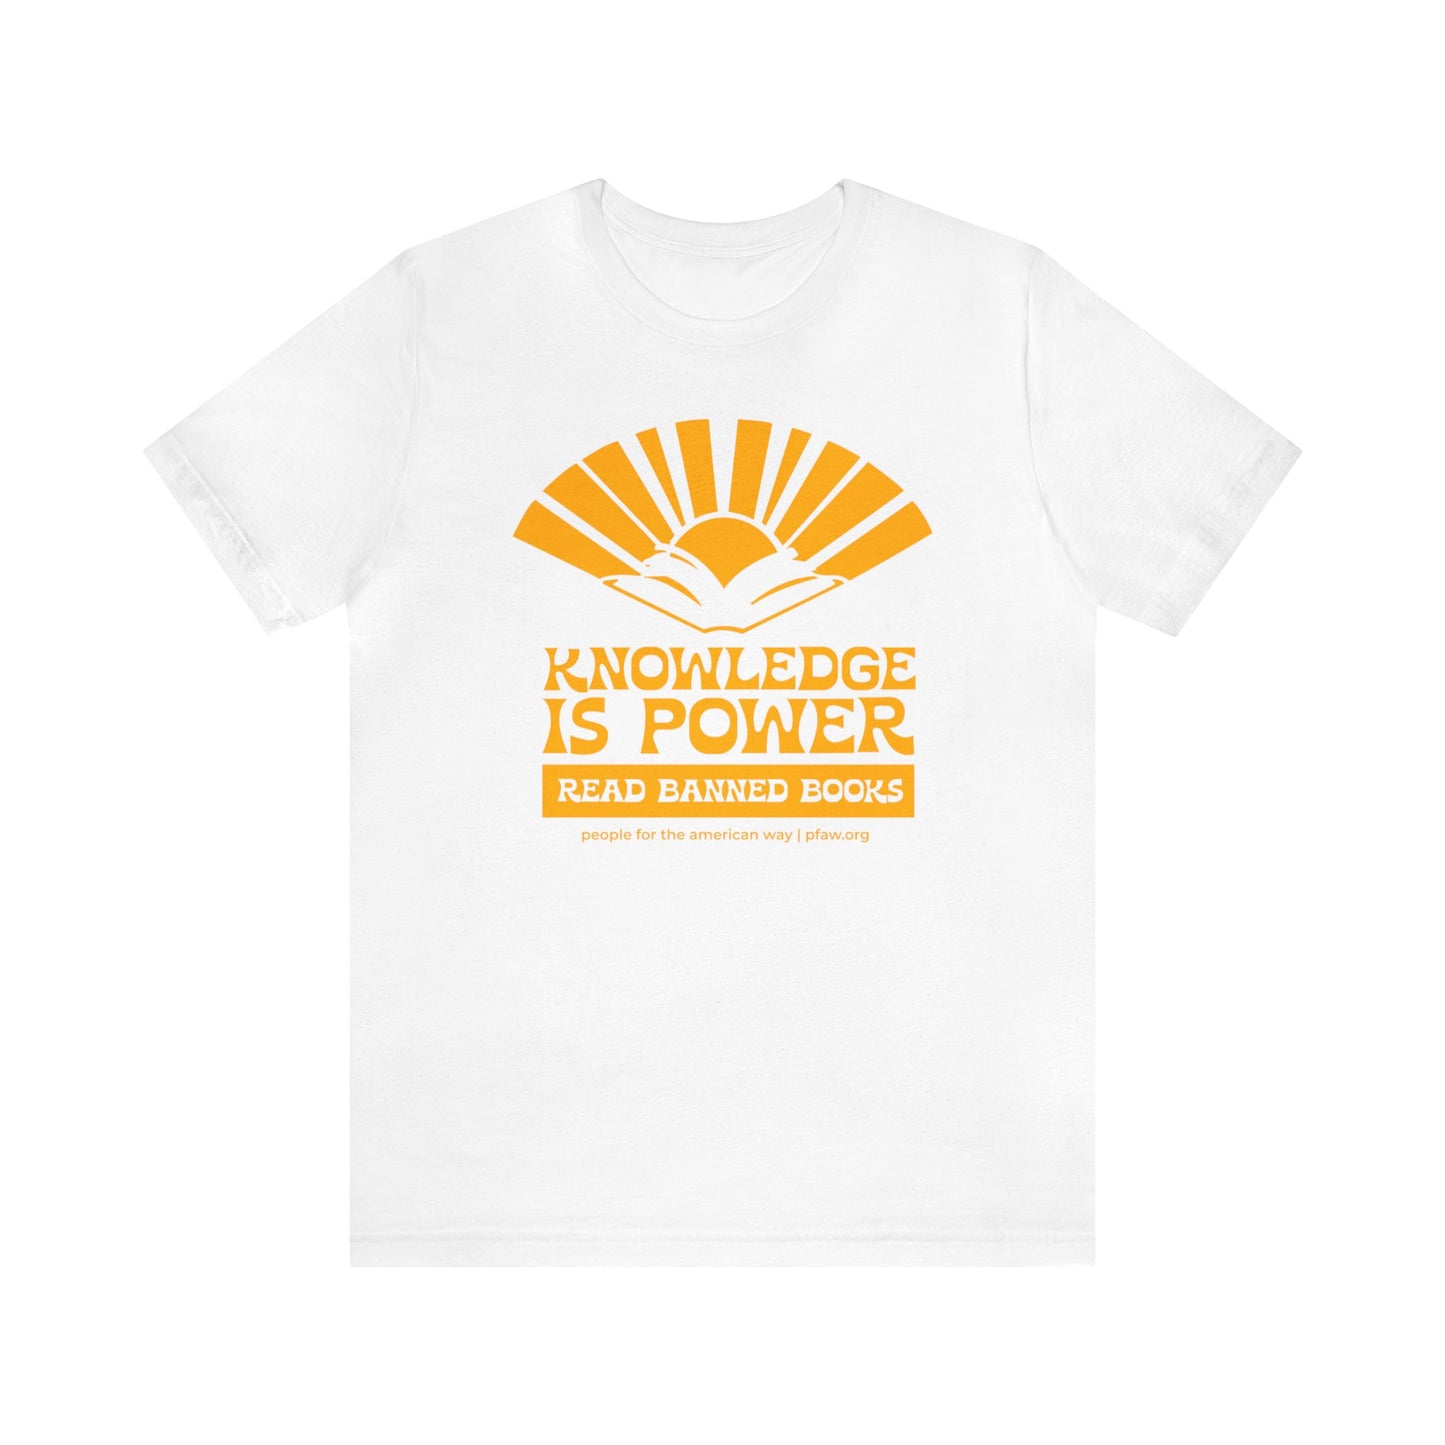 Knowledge Is Power Shirt